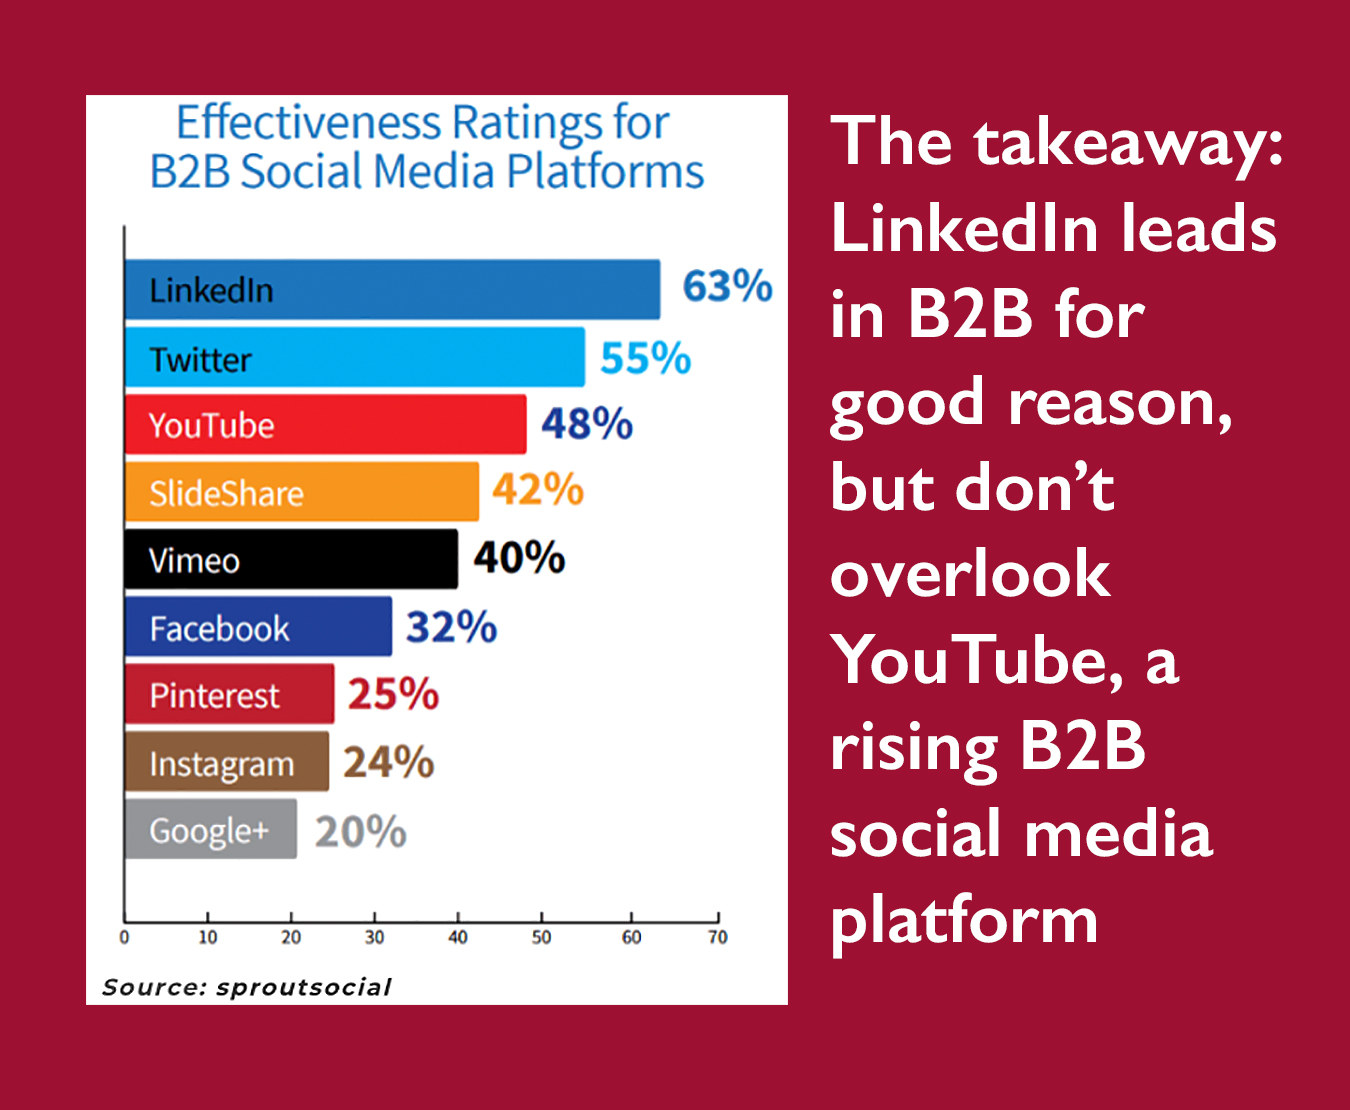 manufacturing customer retention strategies include social media. This image shows the ranked effectiveness of social media platforms for B2B marketing. LinkedIn has top place, followed by Twitter, then YouTube, Slideshare, Vimeo, Facebook, Pinterest, Instagram and Google+.